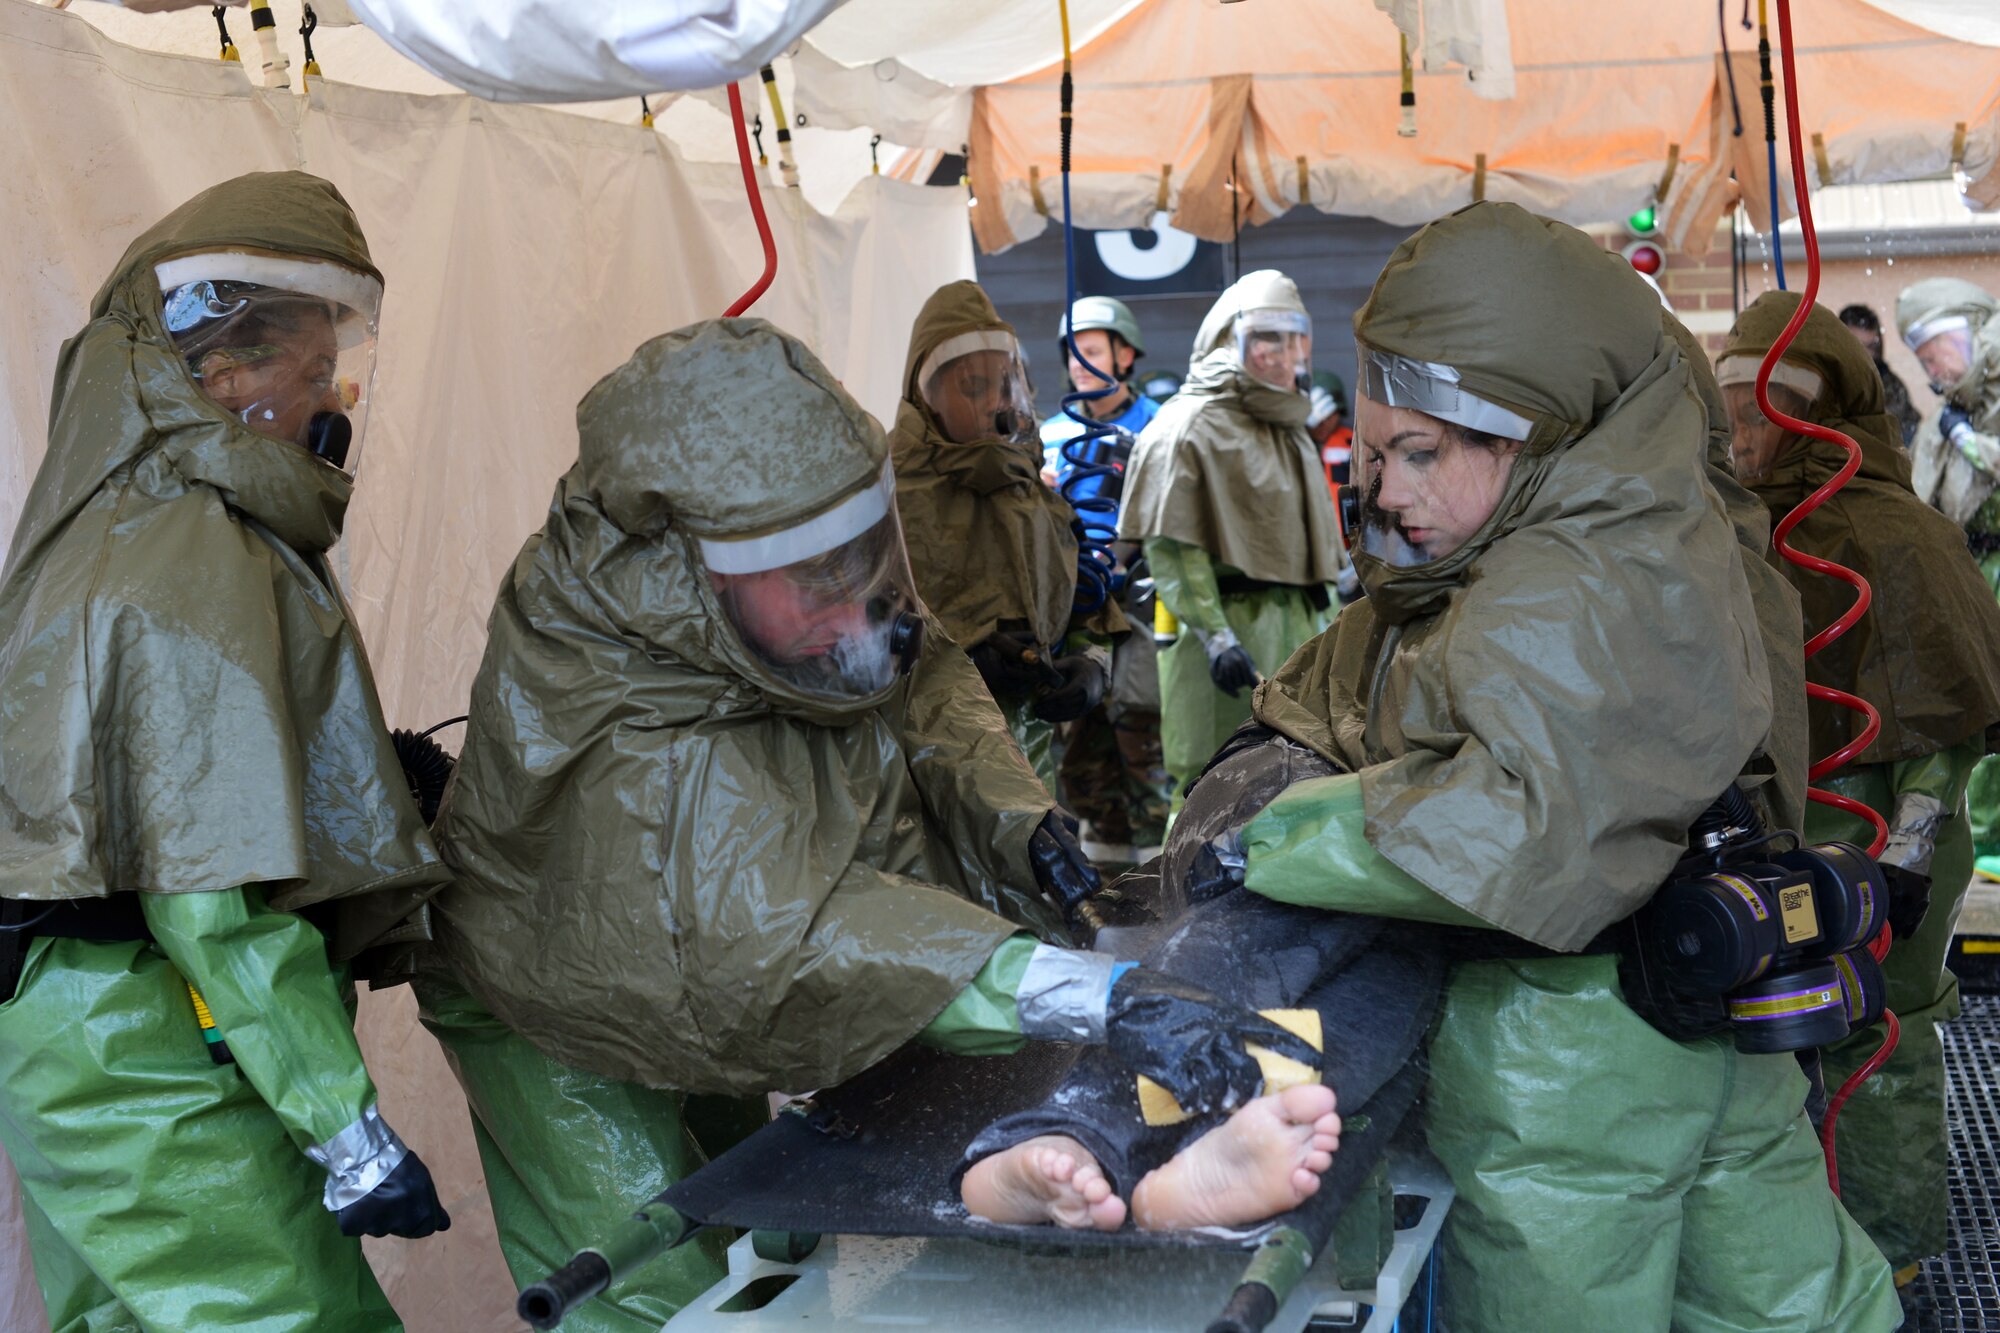 48th Medical Group Airmen decontaminate a patient with simulated injuries following a mass casualty scenario during a readiness exercise at Royal Air Force Lakenheath, England, June 5, 2018. Airmen from the 192nd Medical Group, Virginia Air National Guard, supported the exercise by participating as role players during multiple scenarios. (U.S. Air Force photo by Master Sgt. Eric Burks)